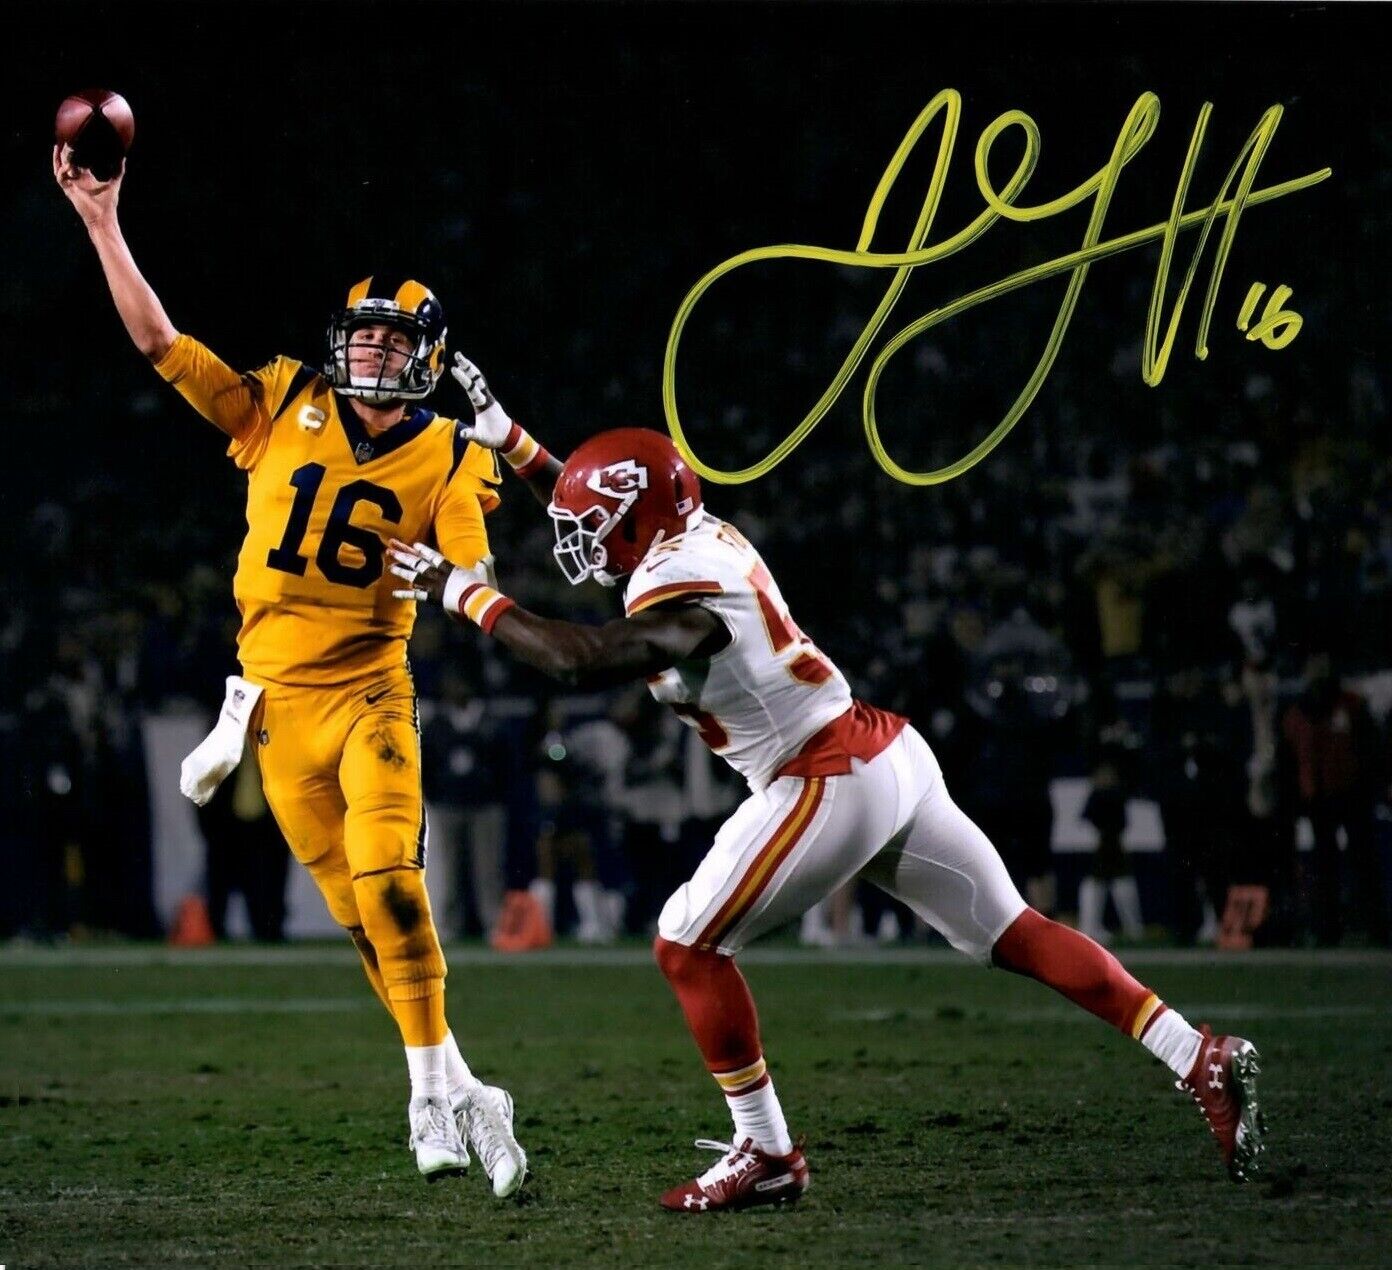 Jared Goff Autographed Signed 8x10 Photo Poster painting ( Rams ) REPRINT ,